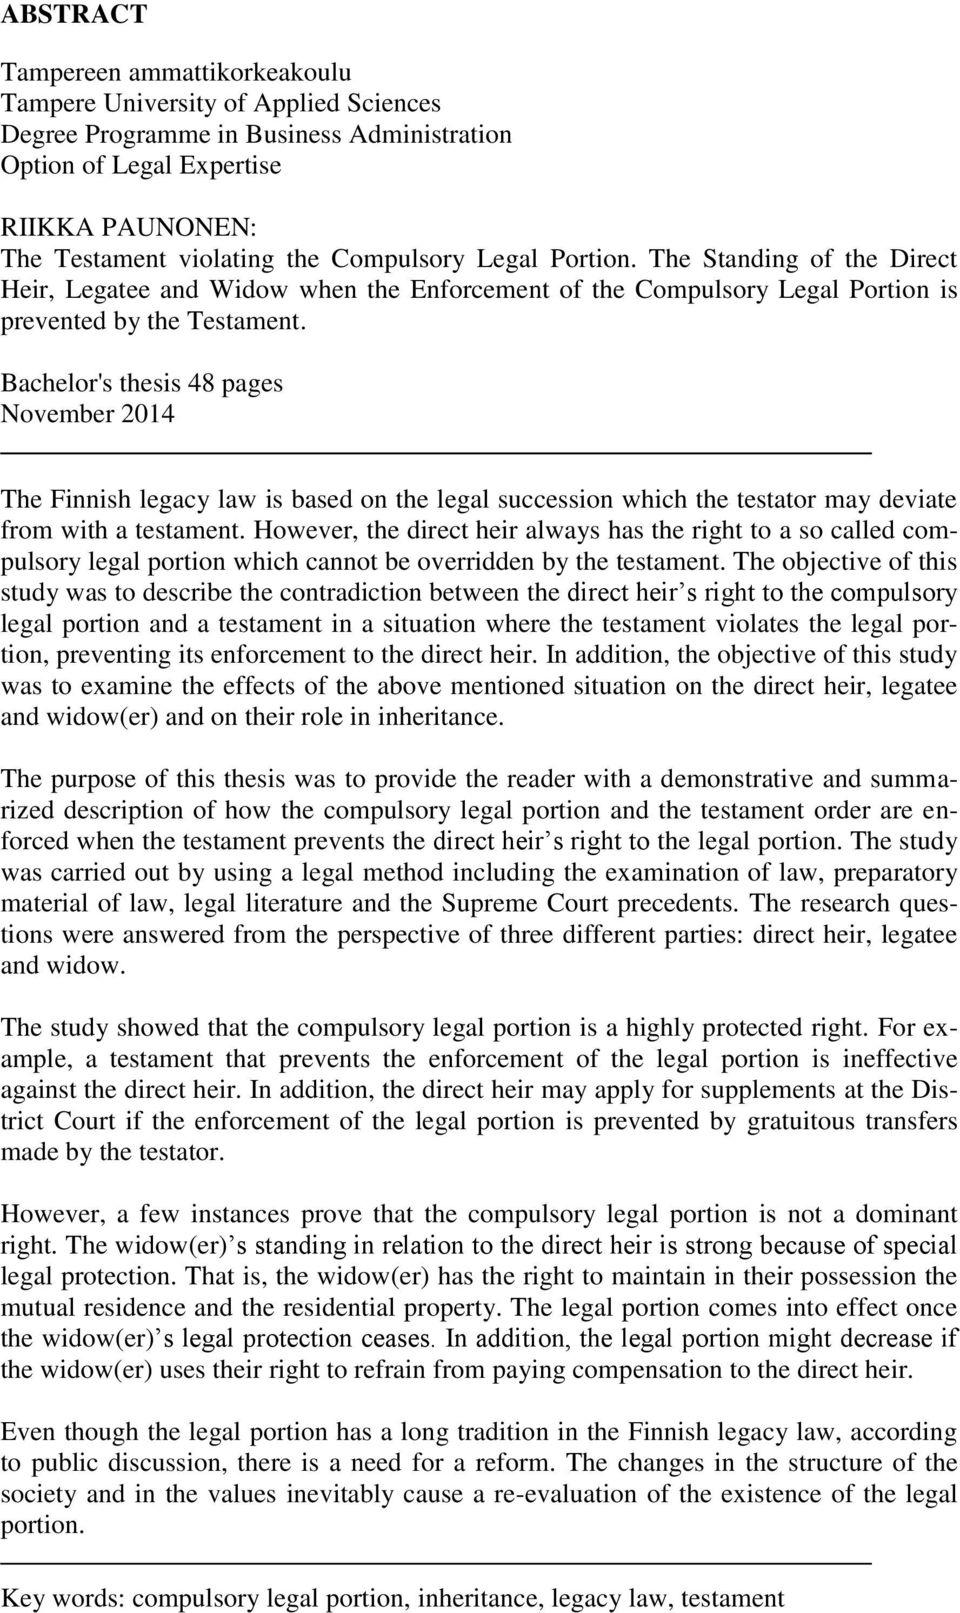 Bachelor's thesis 48 pages November 2014 The Finnish legacy law is based on the legal succession which the testator may deviate from with a testament.